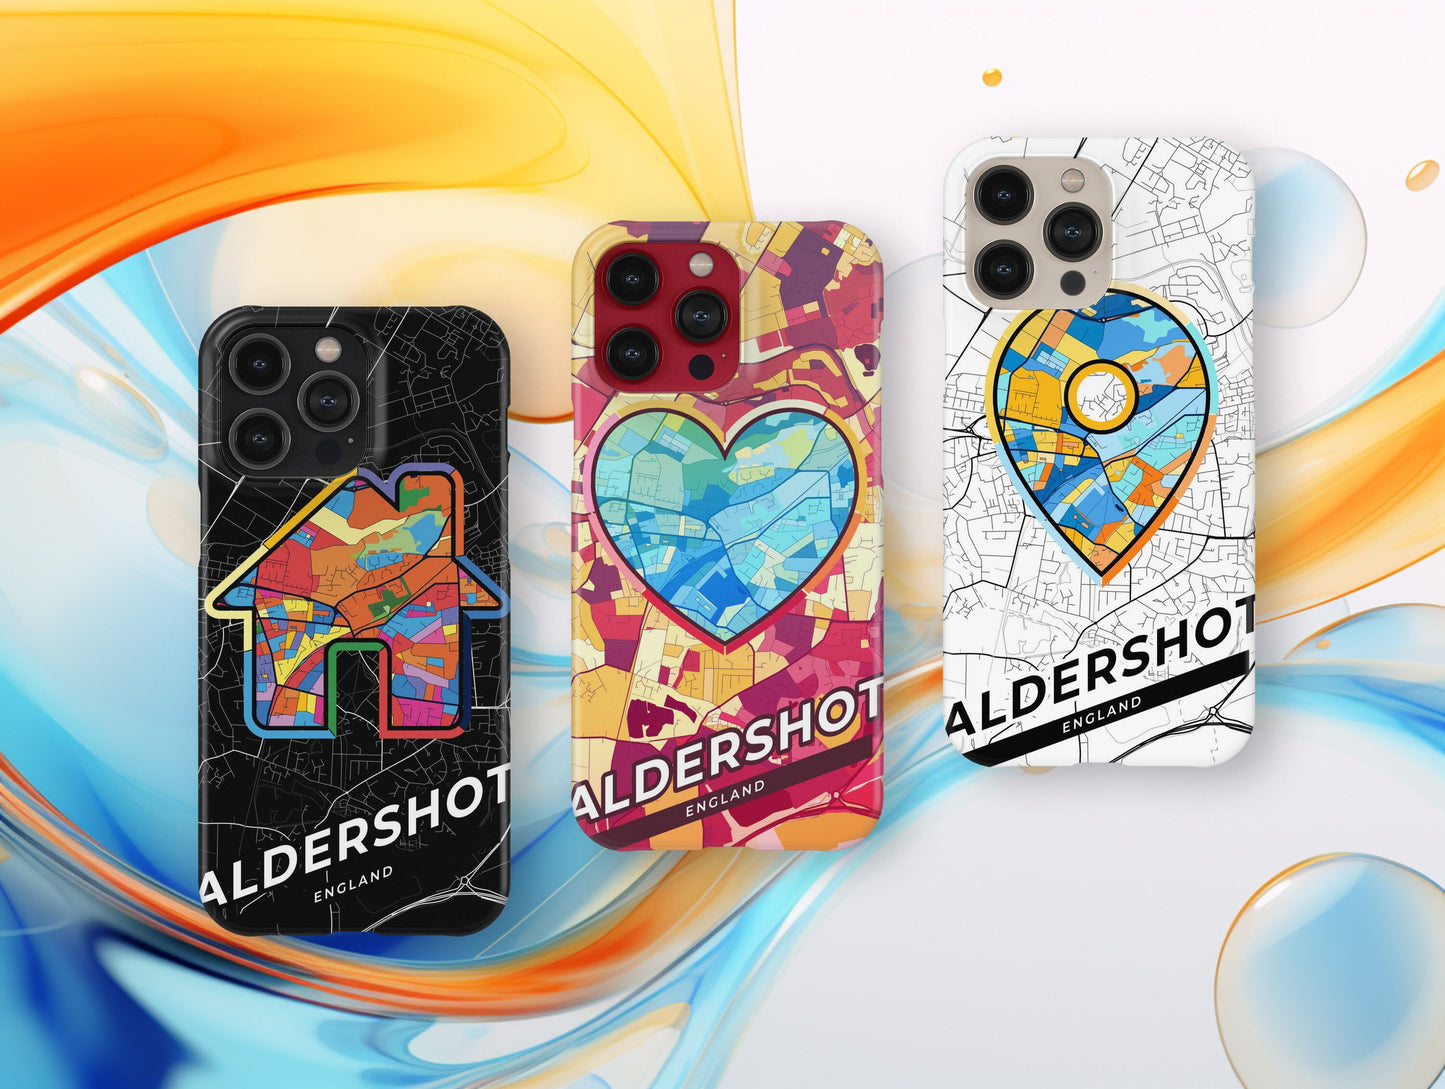 Aldershot England slim phone case with colorful icon. Birthday, wedding or housewarming gift. Couple match cases.